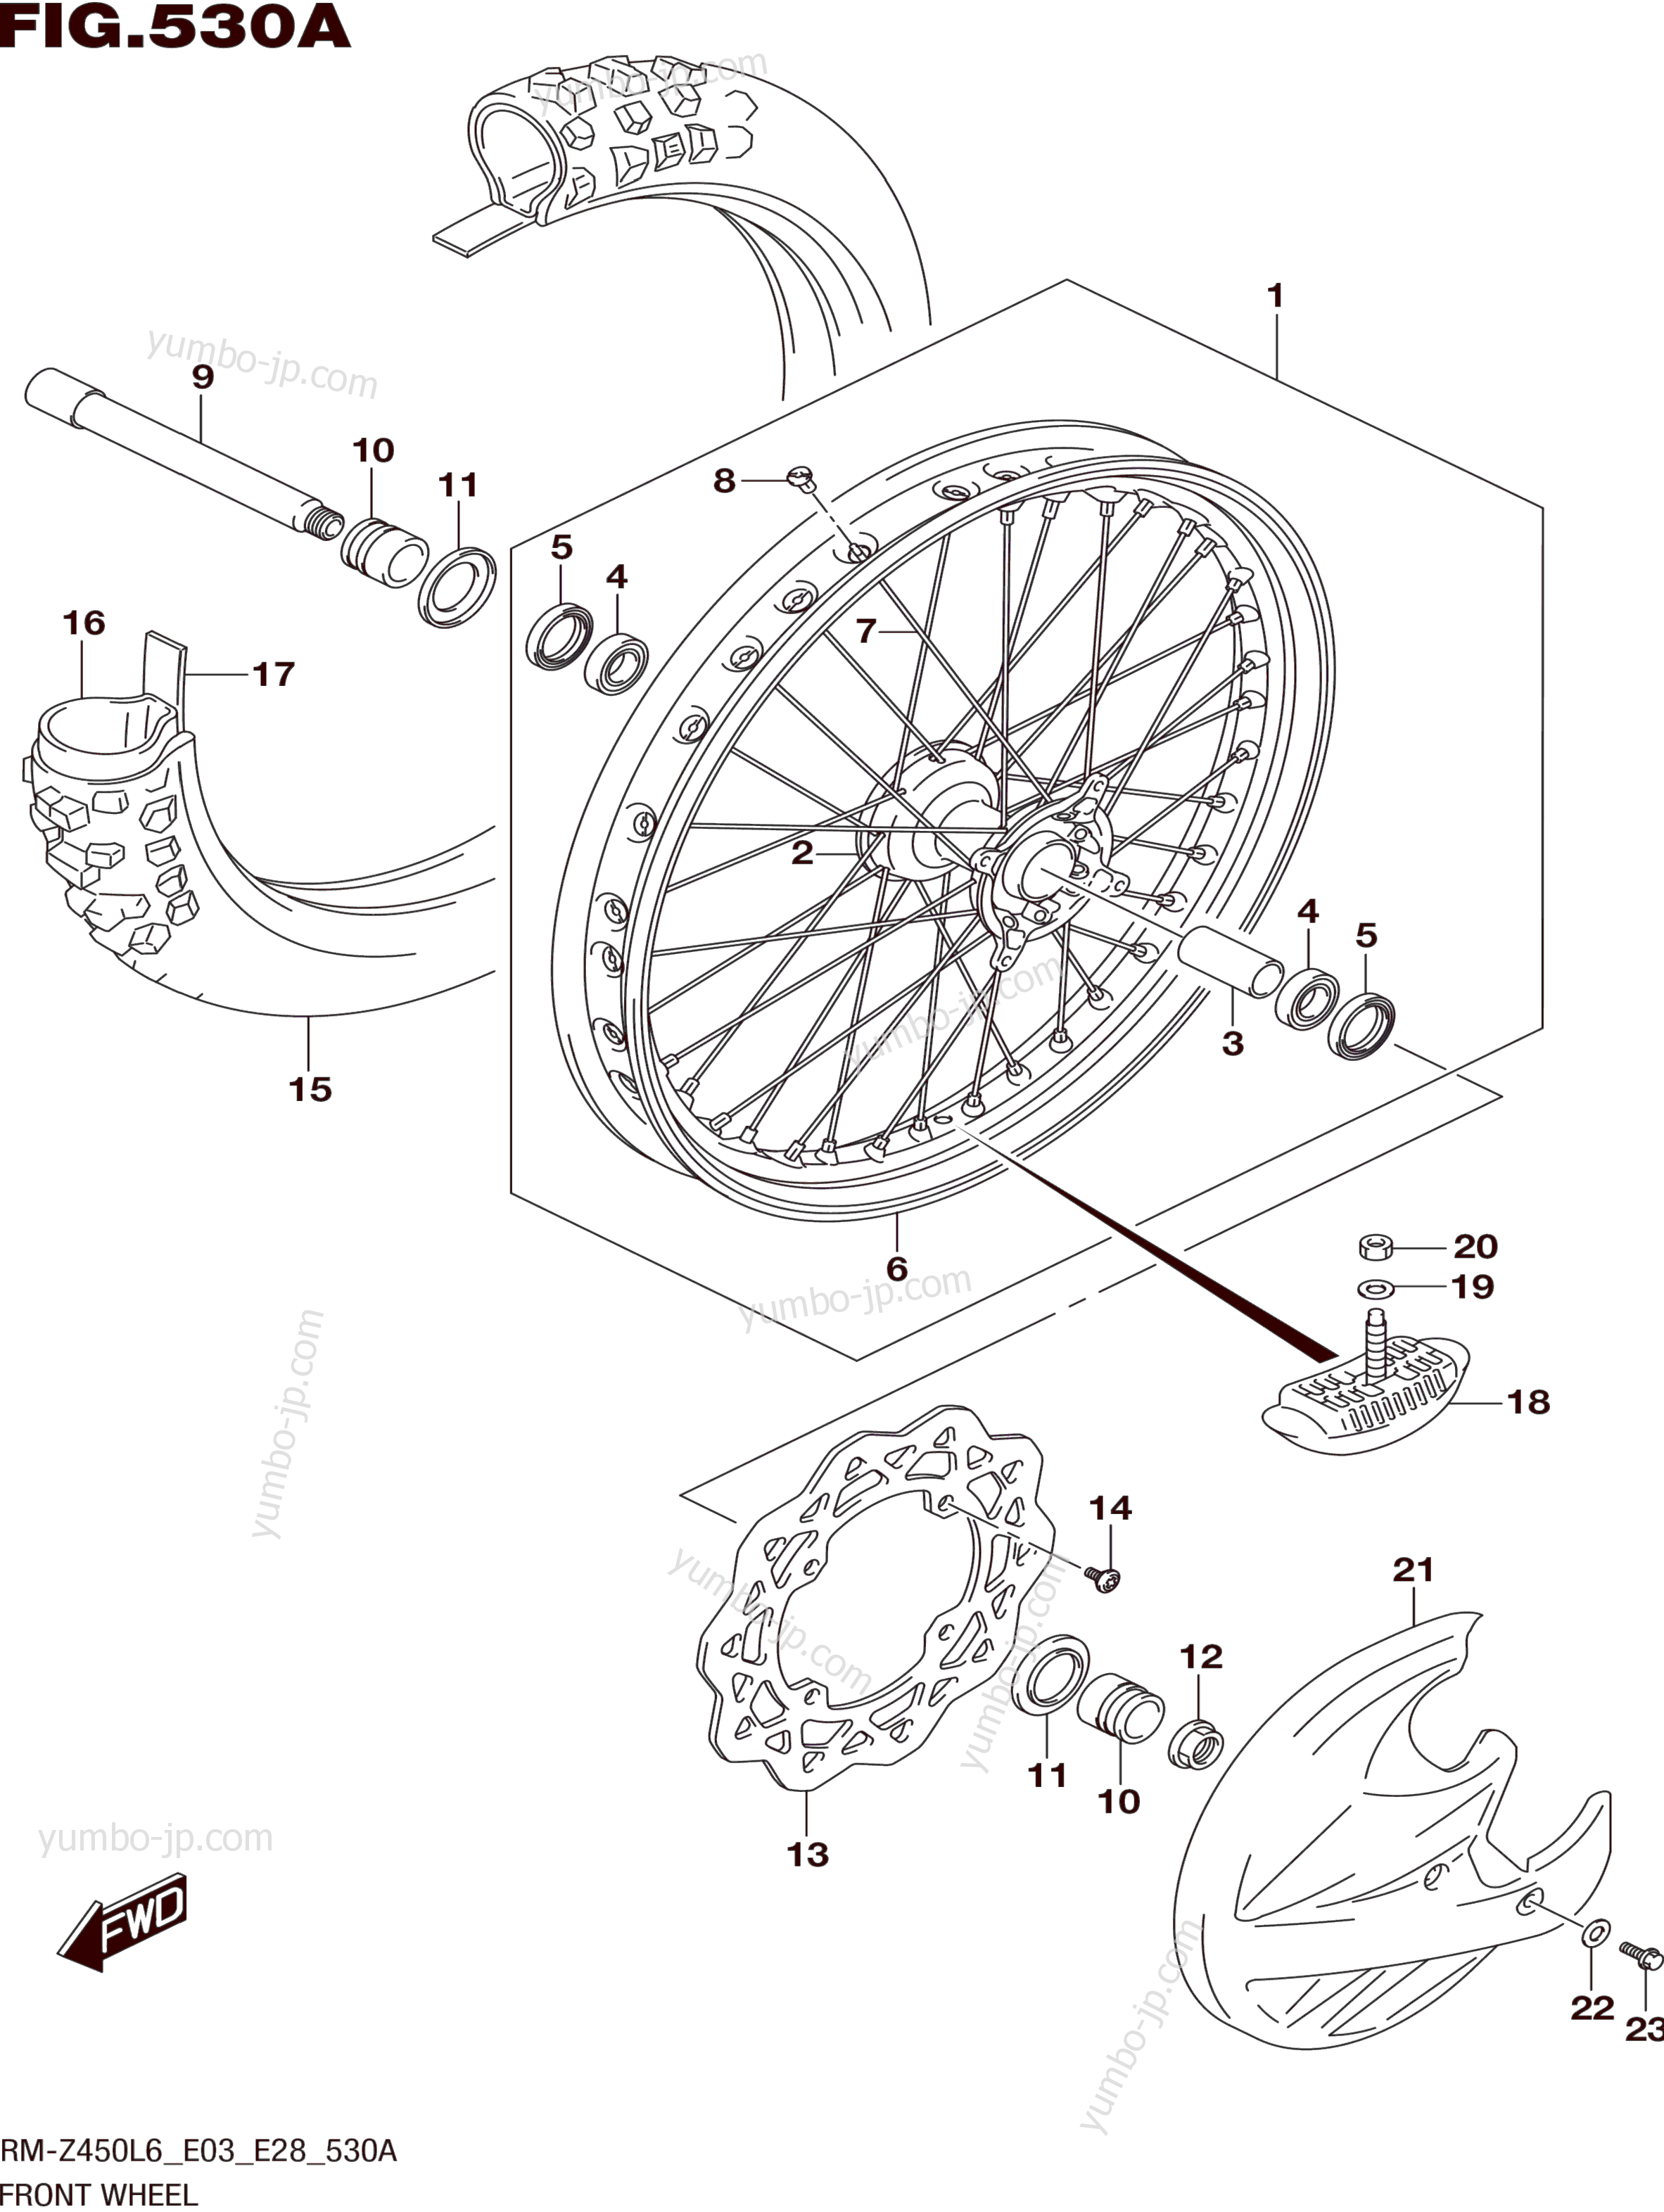 FRONT WHEEL for motorcycles SUZUKI RM-Z450 2016 year